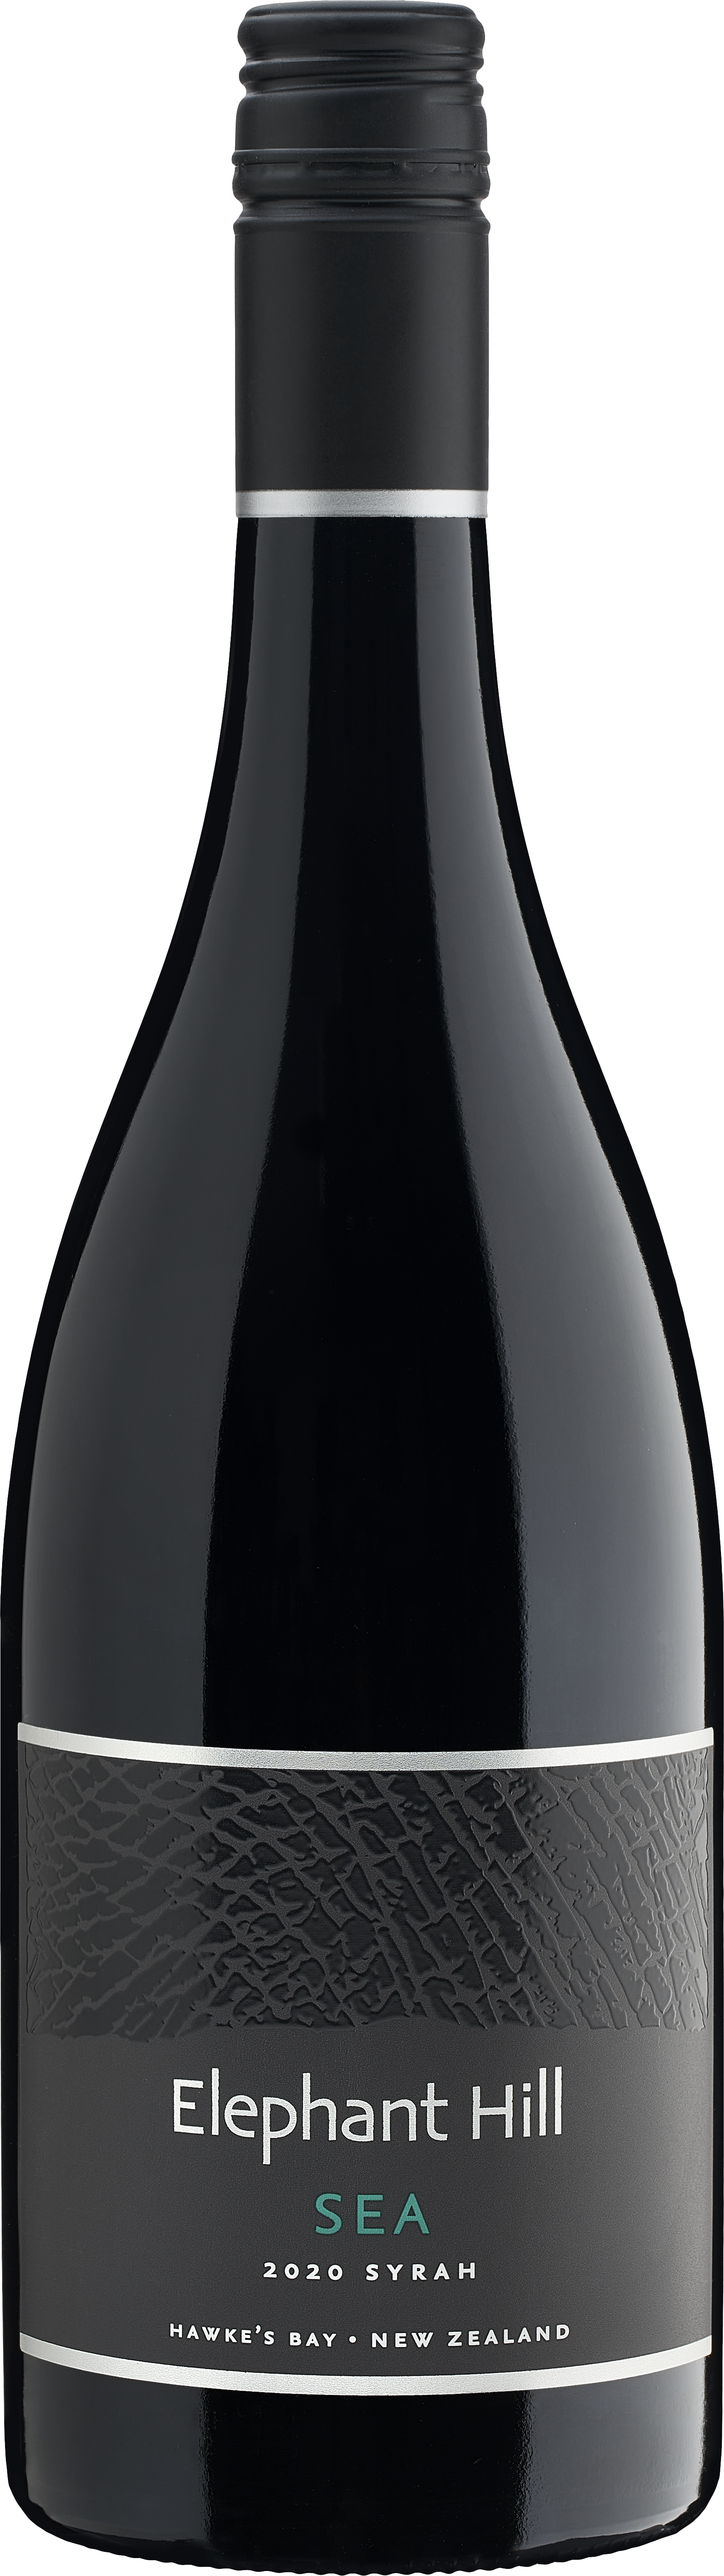 2020 Elephant Hill SEA Syrah <br>*NEW RELEASE*<br>Limited to 6 bottles per person